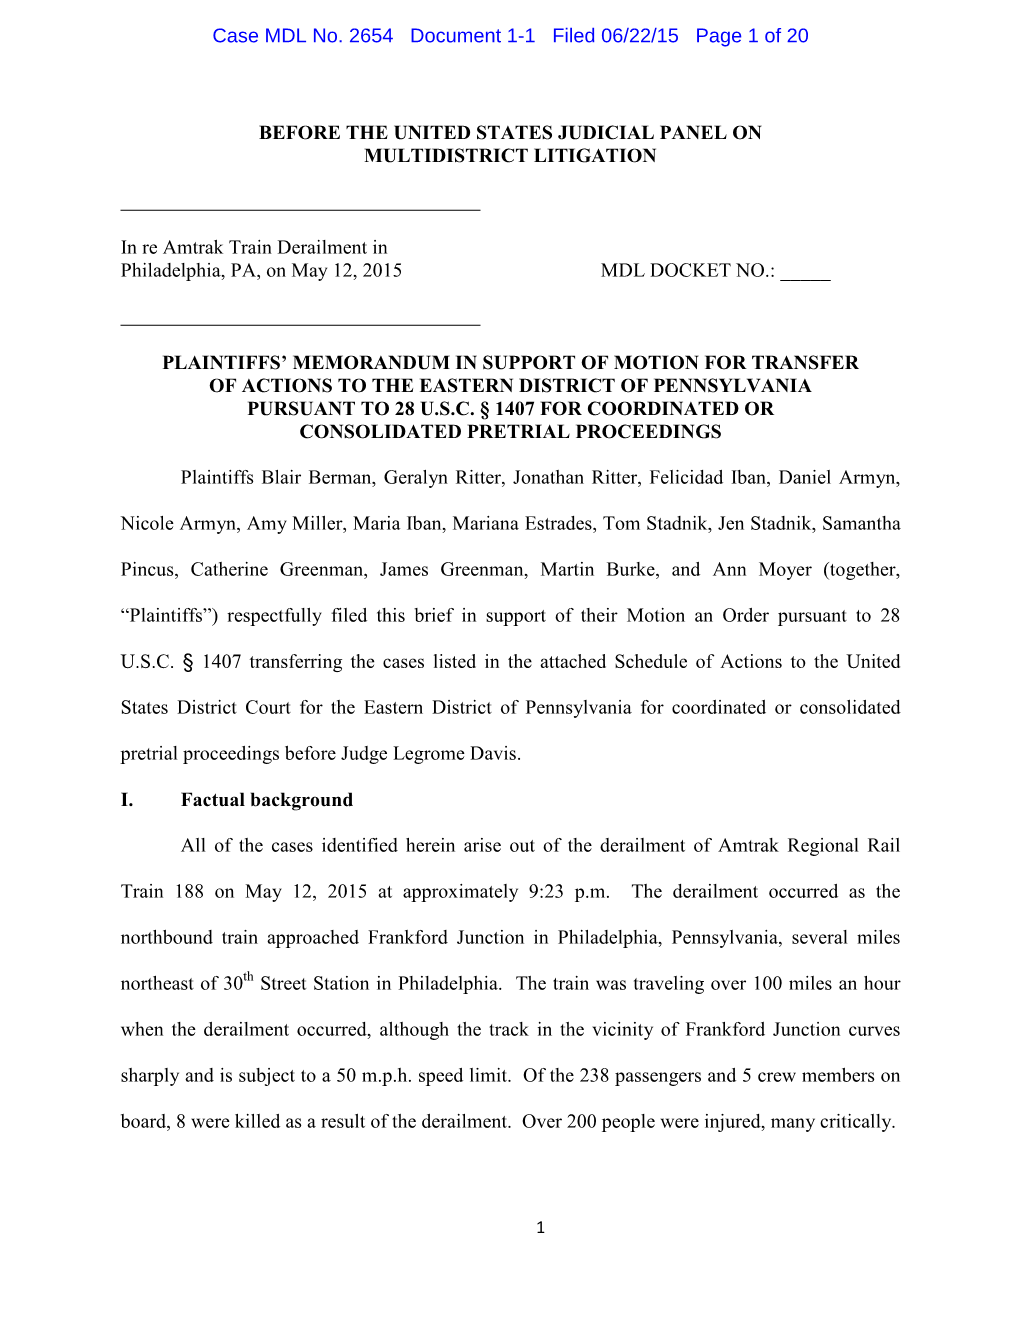 Case MDL No. 2654 Document 1-1 Filed 06/22/15 Page 1 of 20